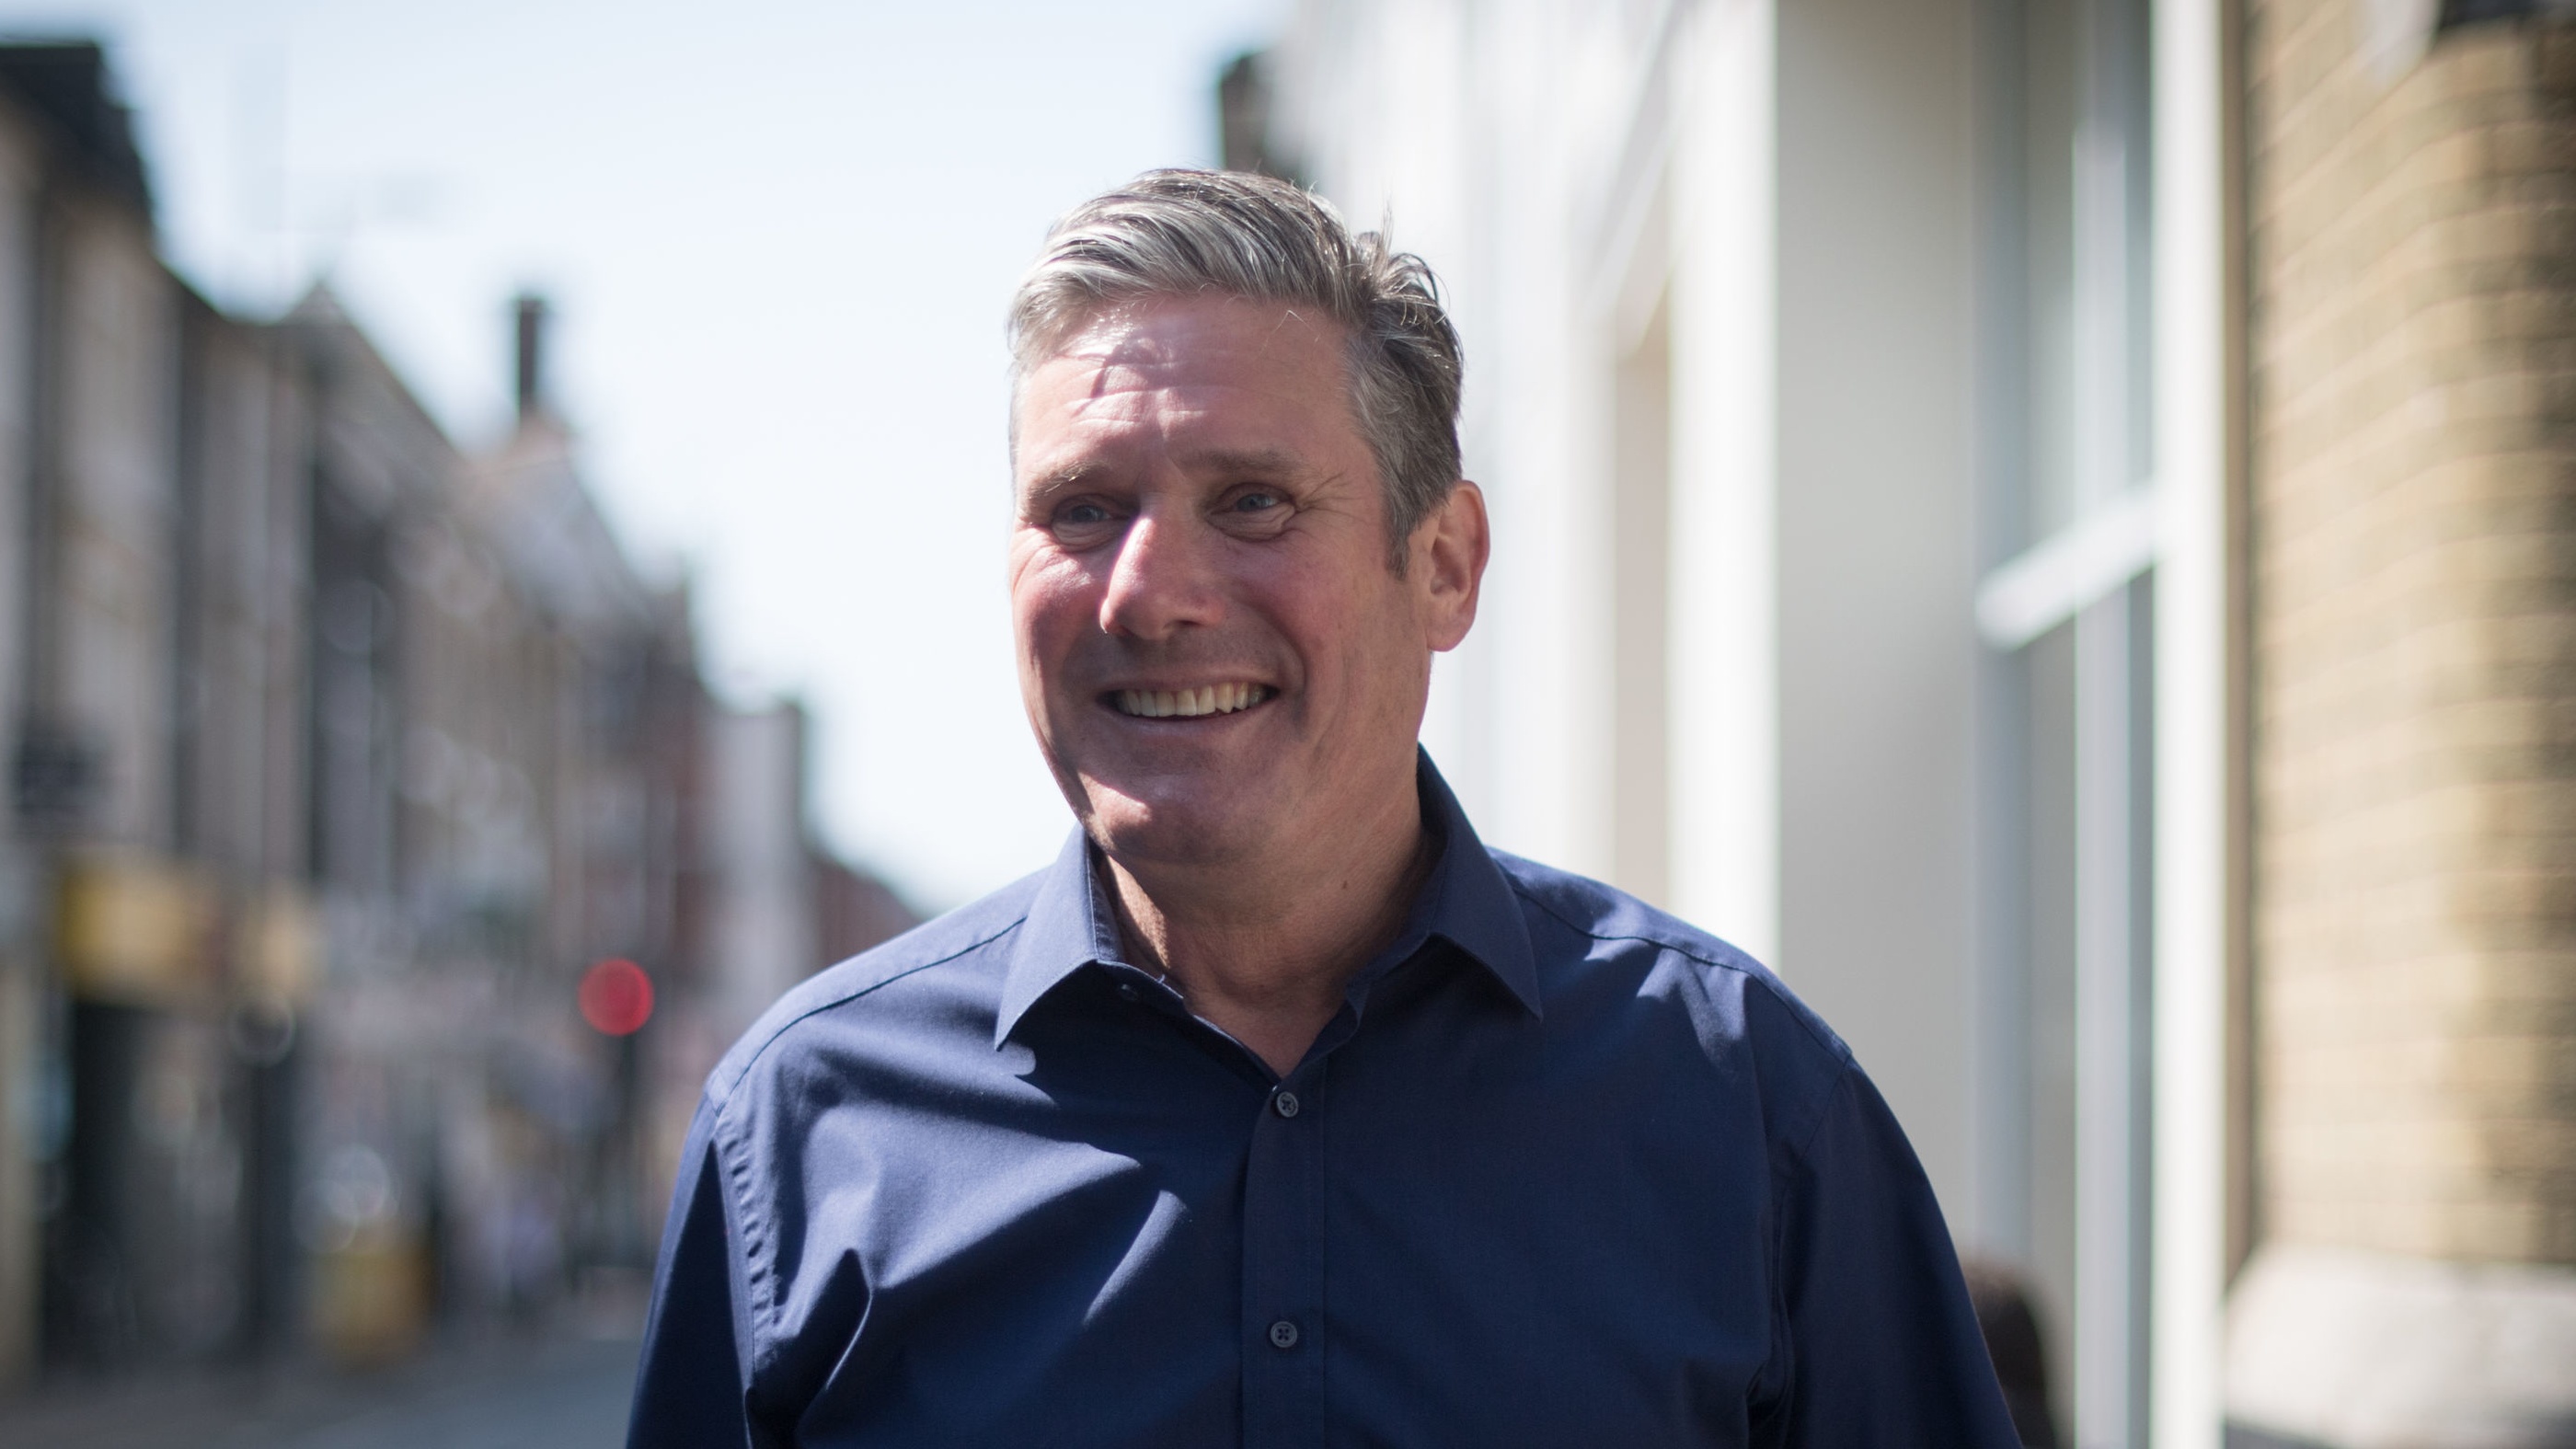 Keir Starmer during a visit to Ipswich this week